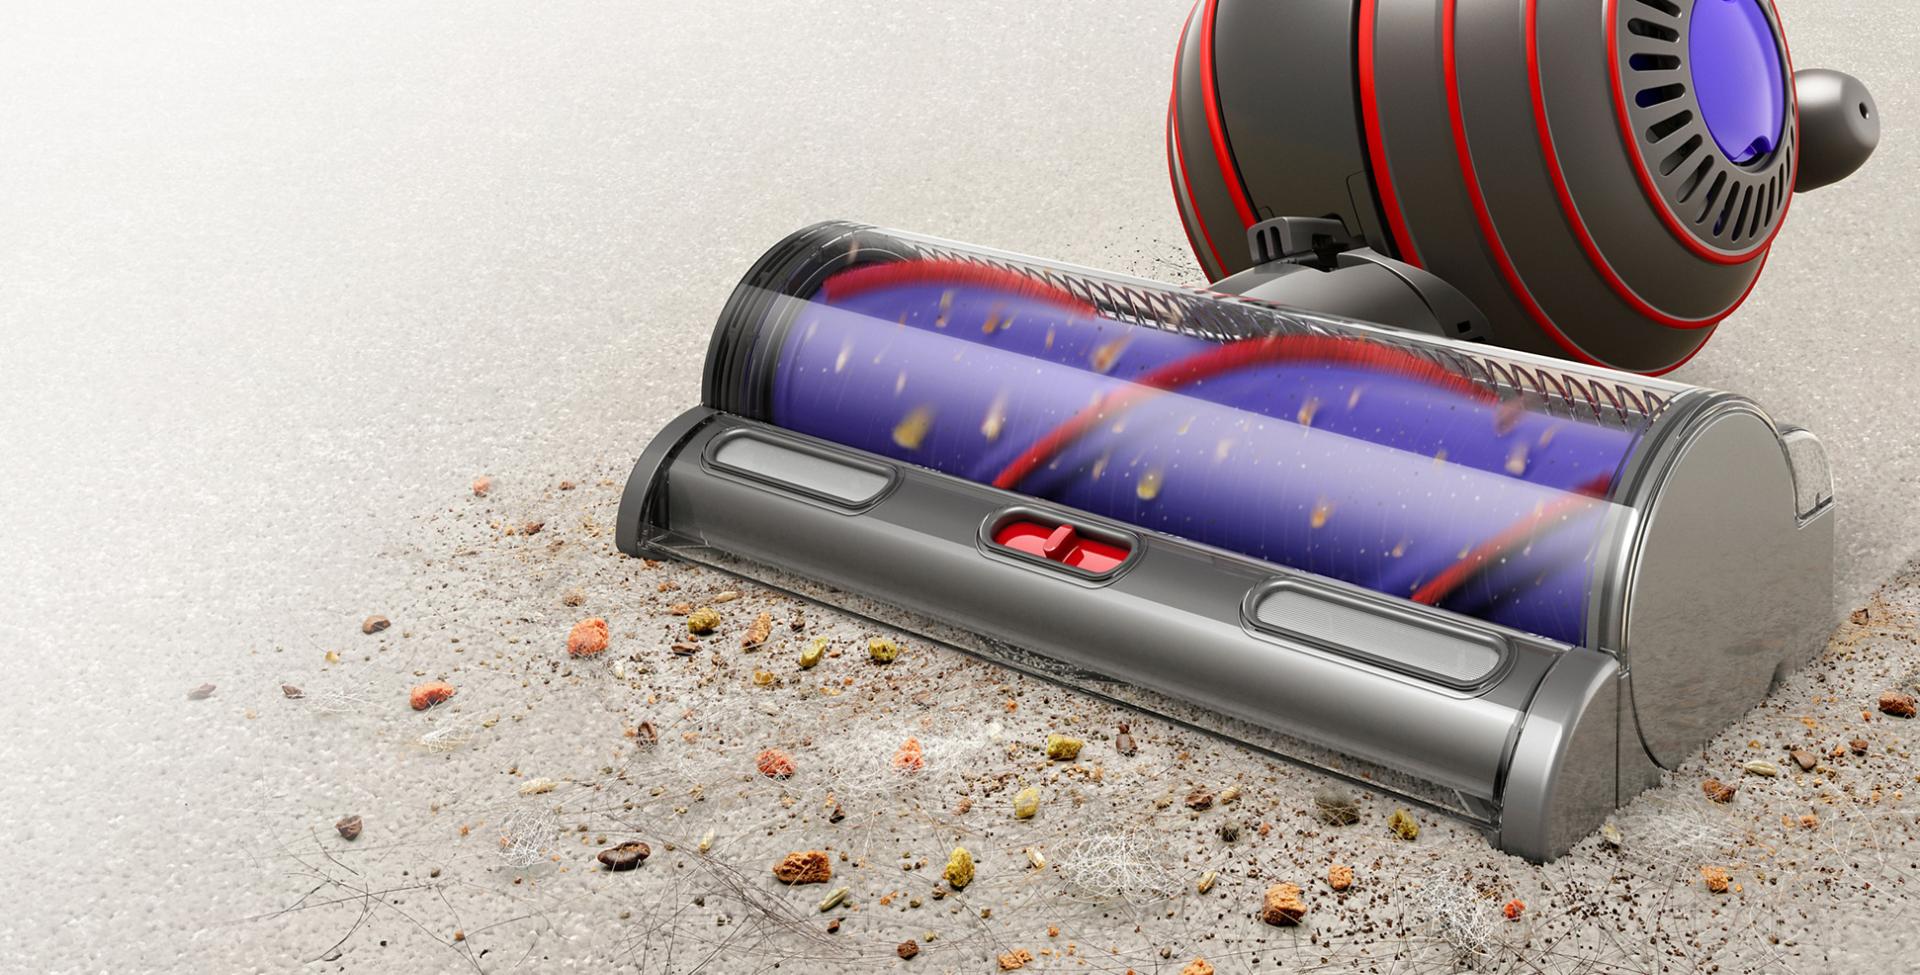 A Dyson Ball Animal vacuum cleaning a floor